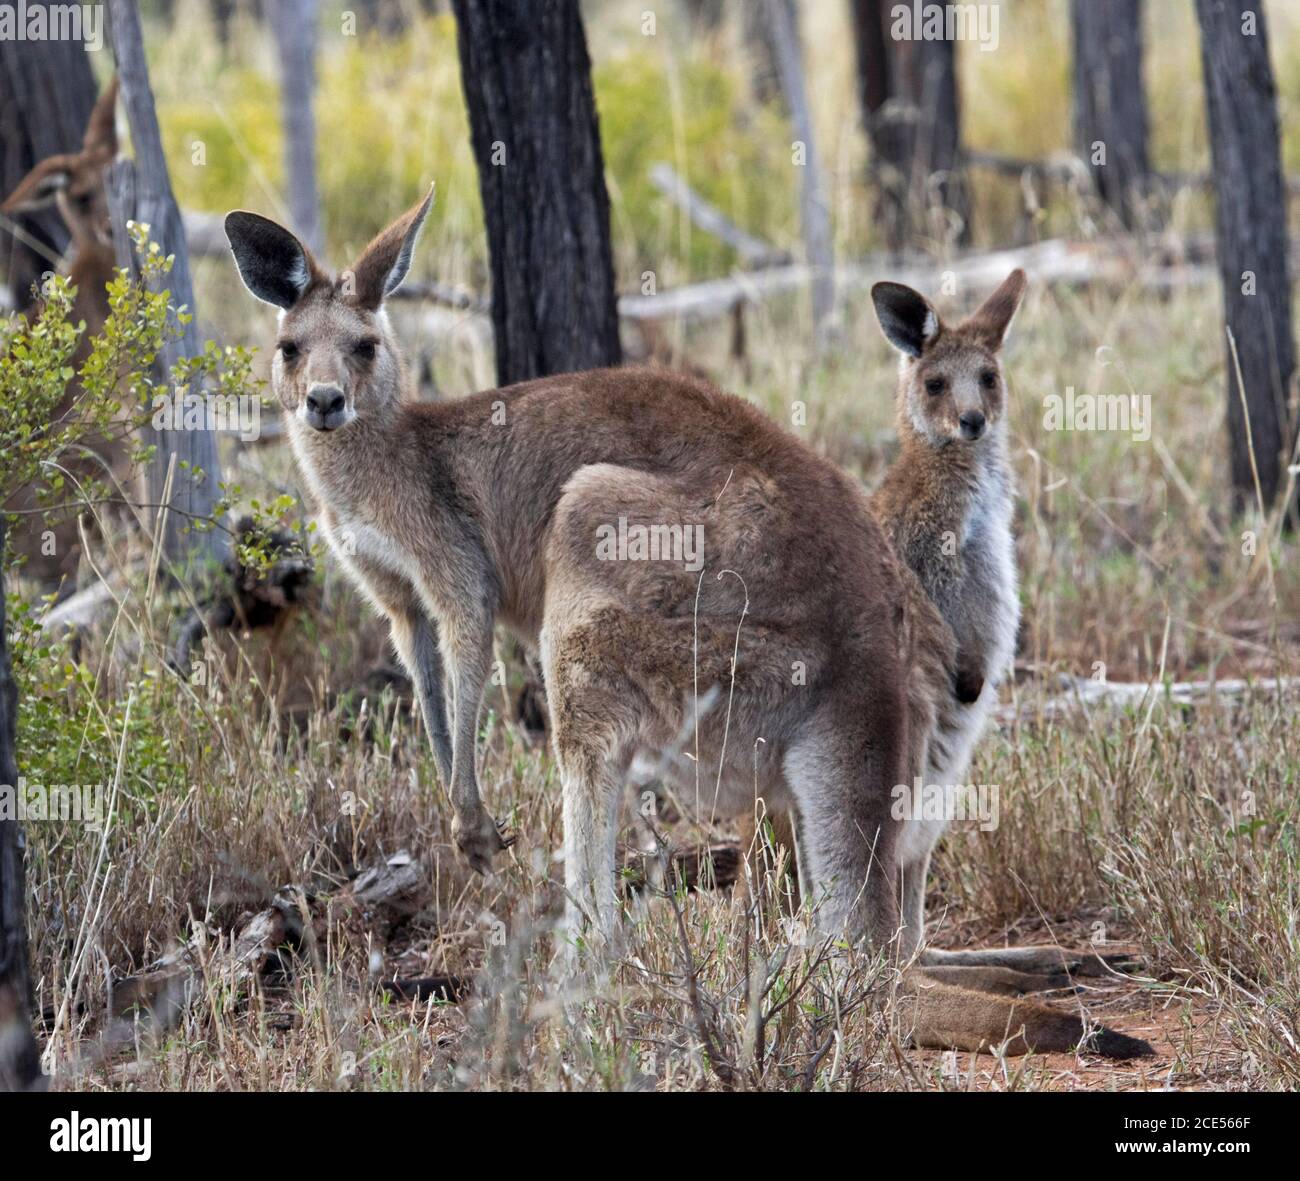 Female Australian Eastern Grey kangaroo  with large young joey, alert and  staring at camera, in the wild, with background of tall grasses & trees, Stock Photo